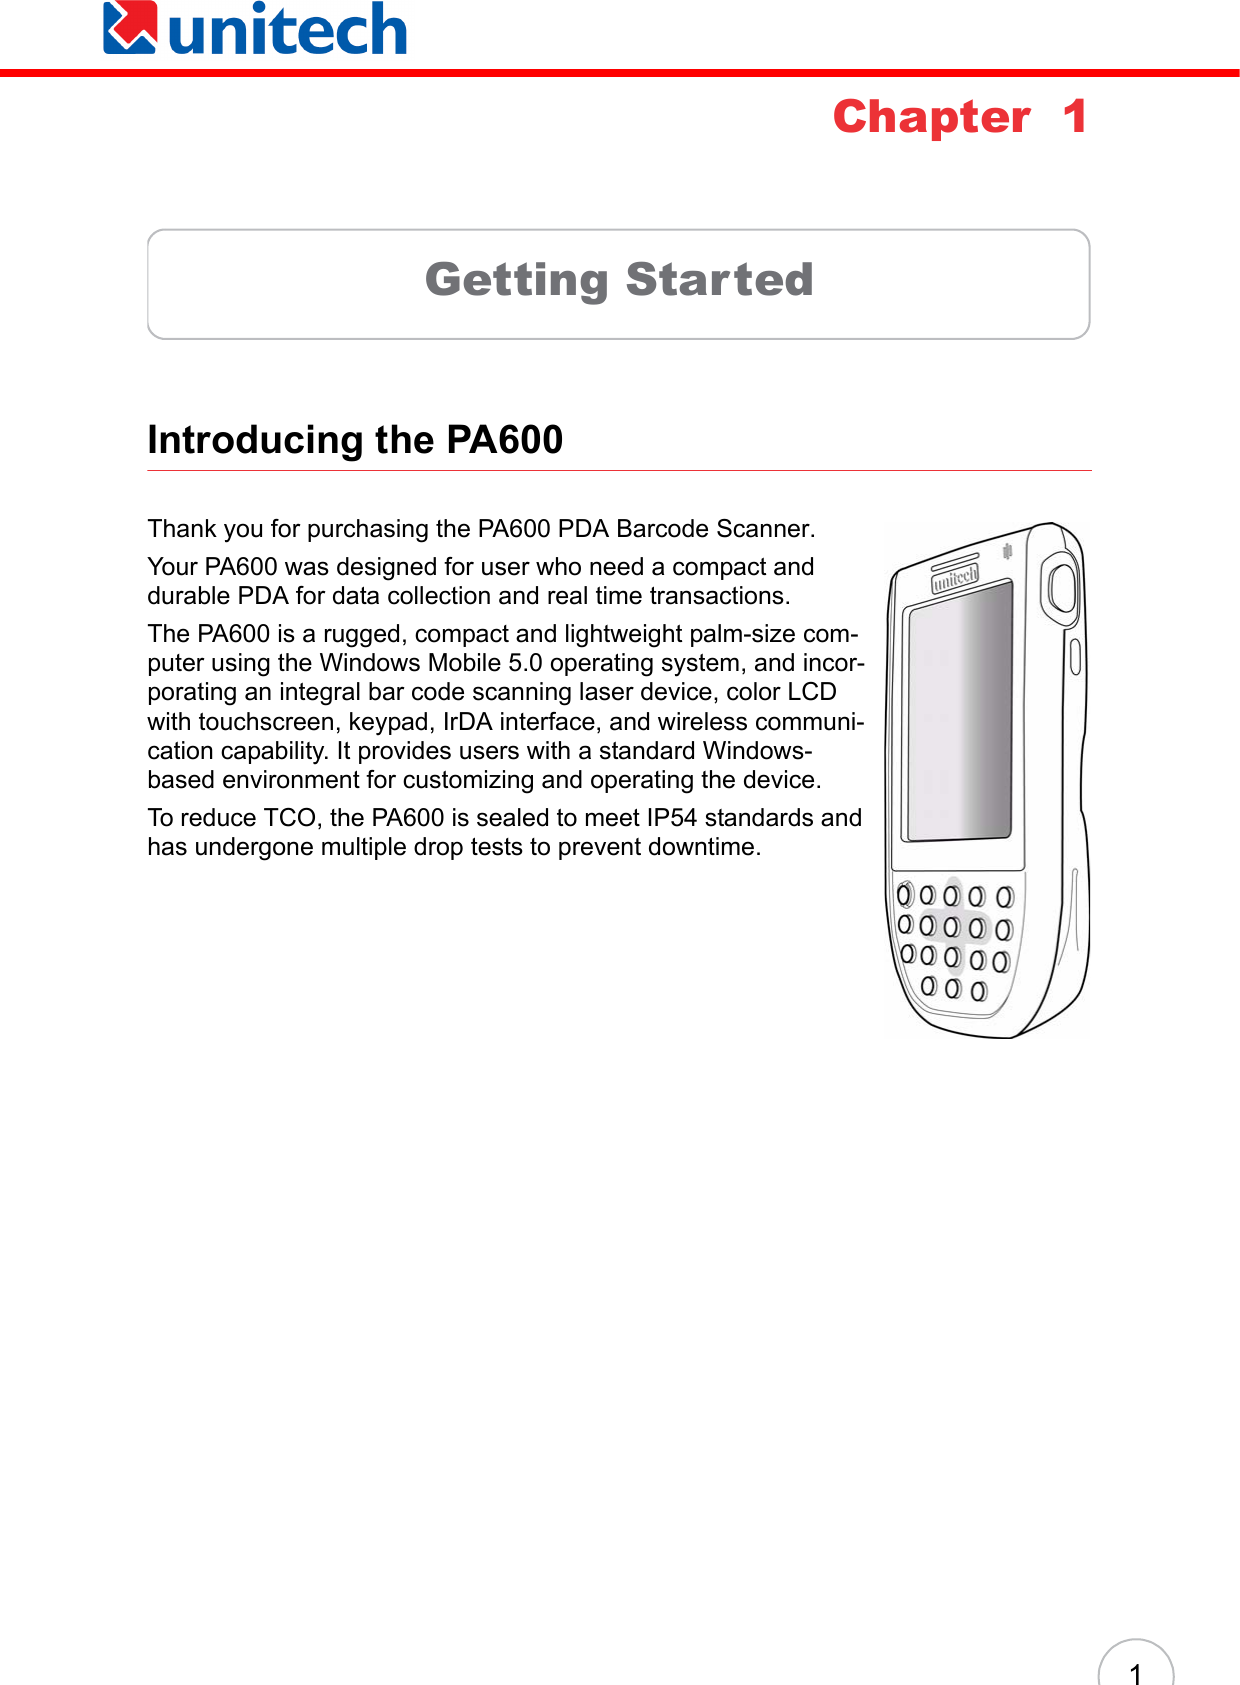  1Chapter  1Getting StartedIntroducing the PA600 Thank you for purchasing the PA600 PDA Barcode Scanner.Your PA600 was designed for user who need a compact and durable PDA for data collection and real time transactions. The PA600 is a rugged, compact and lightweight palm-size com-puter using the Windows Mobile 5.0 operating system, and incor-porating an integral bar code scanning laser device, color LCD with touchscreen, keypad, IrDA interface, and wireless communi-cation capability. It provides users with a standard Windows-based environment for customizing and operating the device.To reduce TCO, the PA600 is sealed to meet IP54 standards and has undergone multiple drop tests to prevent downtime.